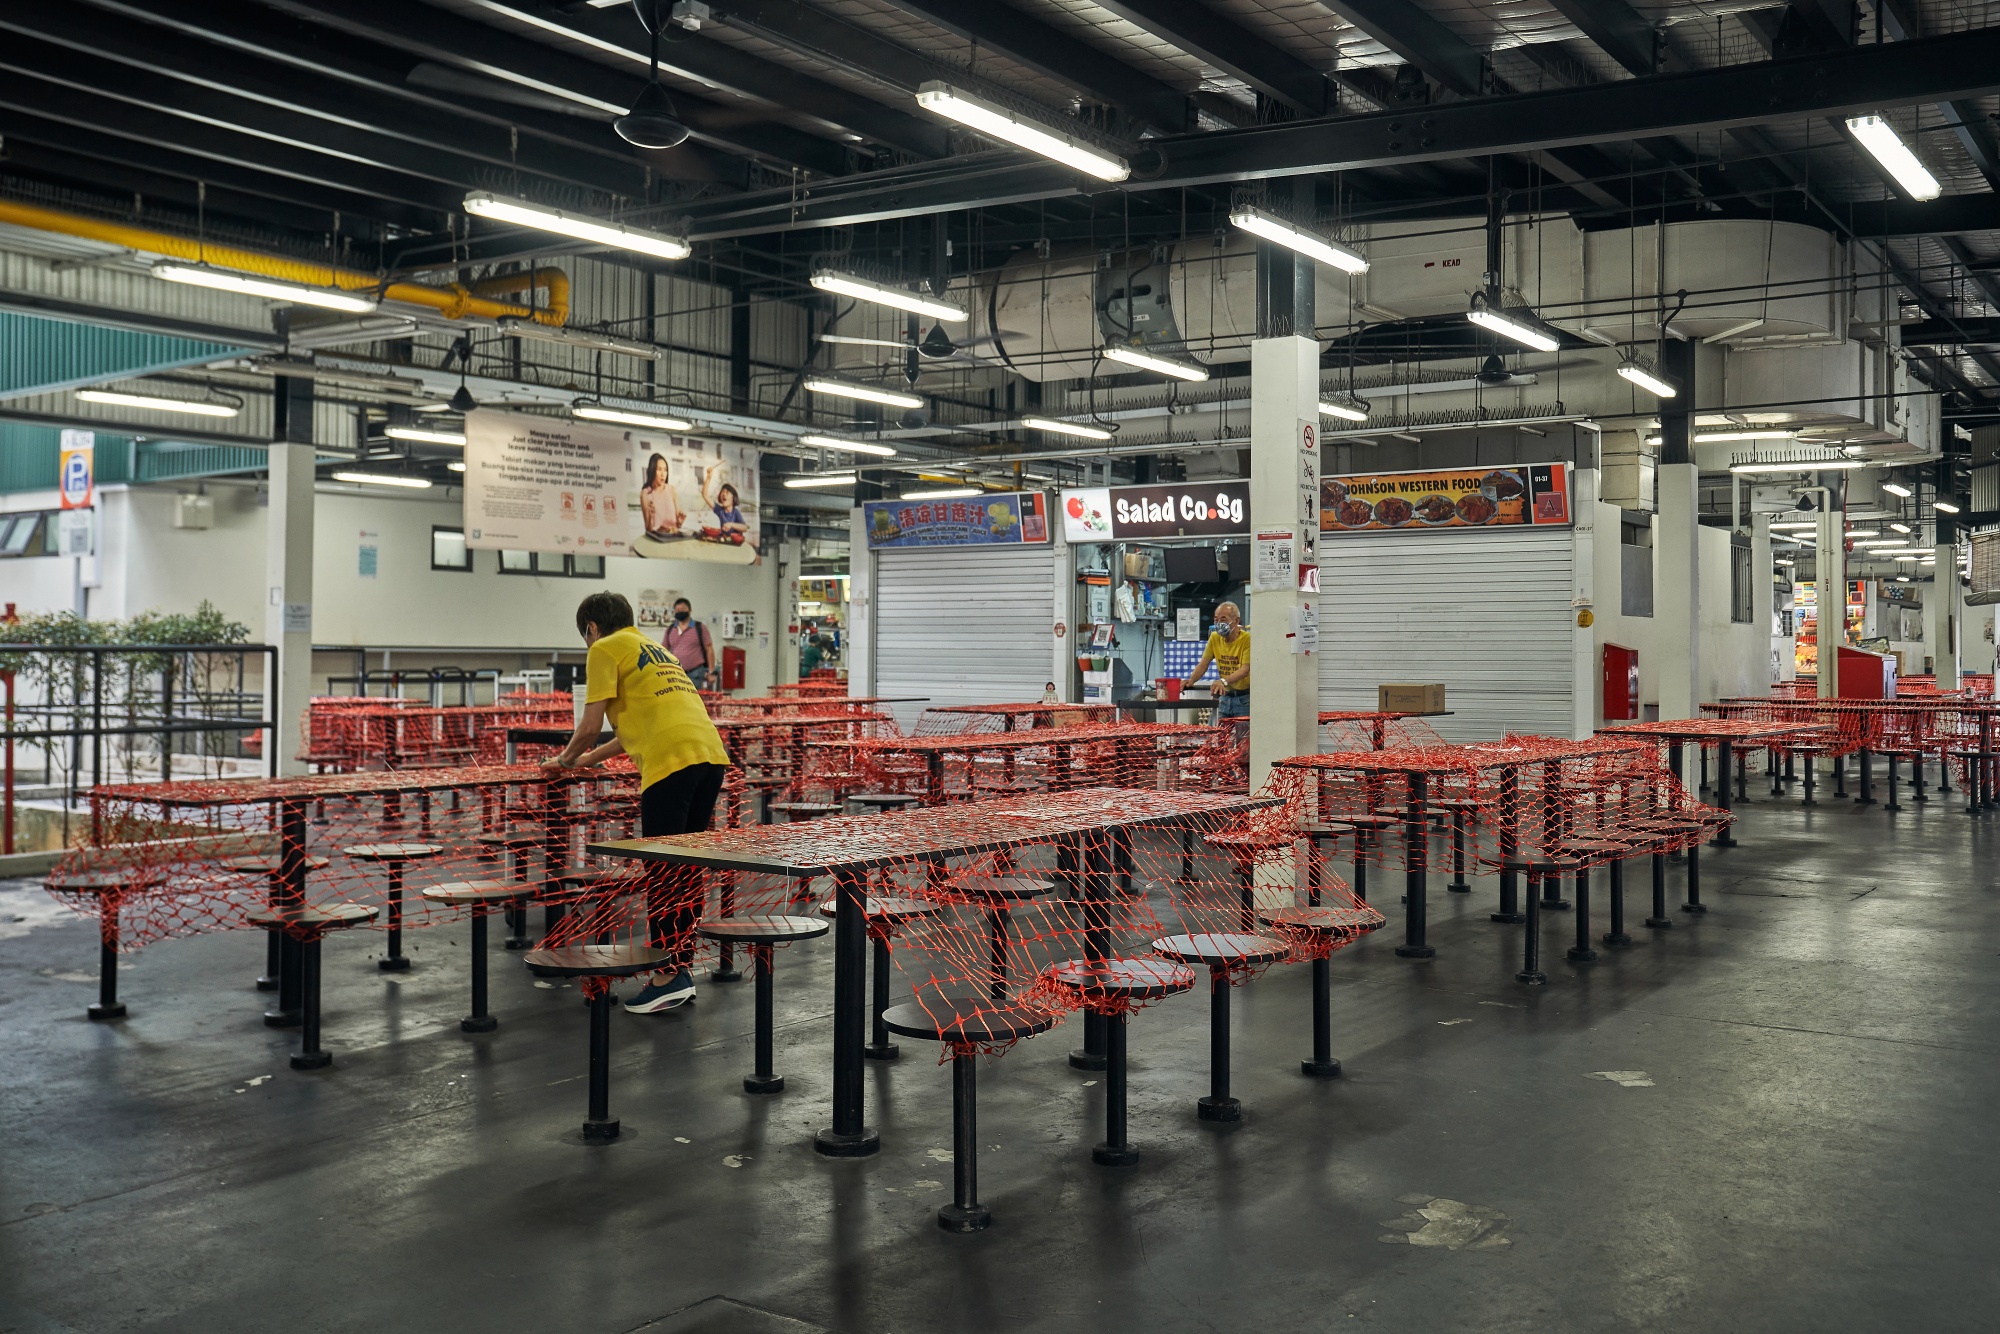 A worker covers tables making them unavailable in front of eateries in Singapore on May 19.